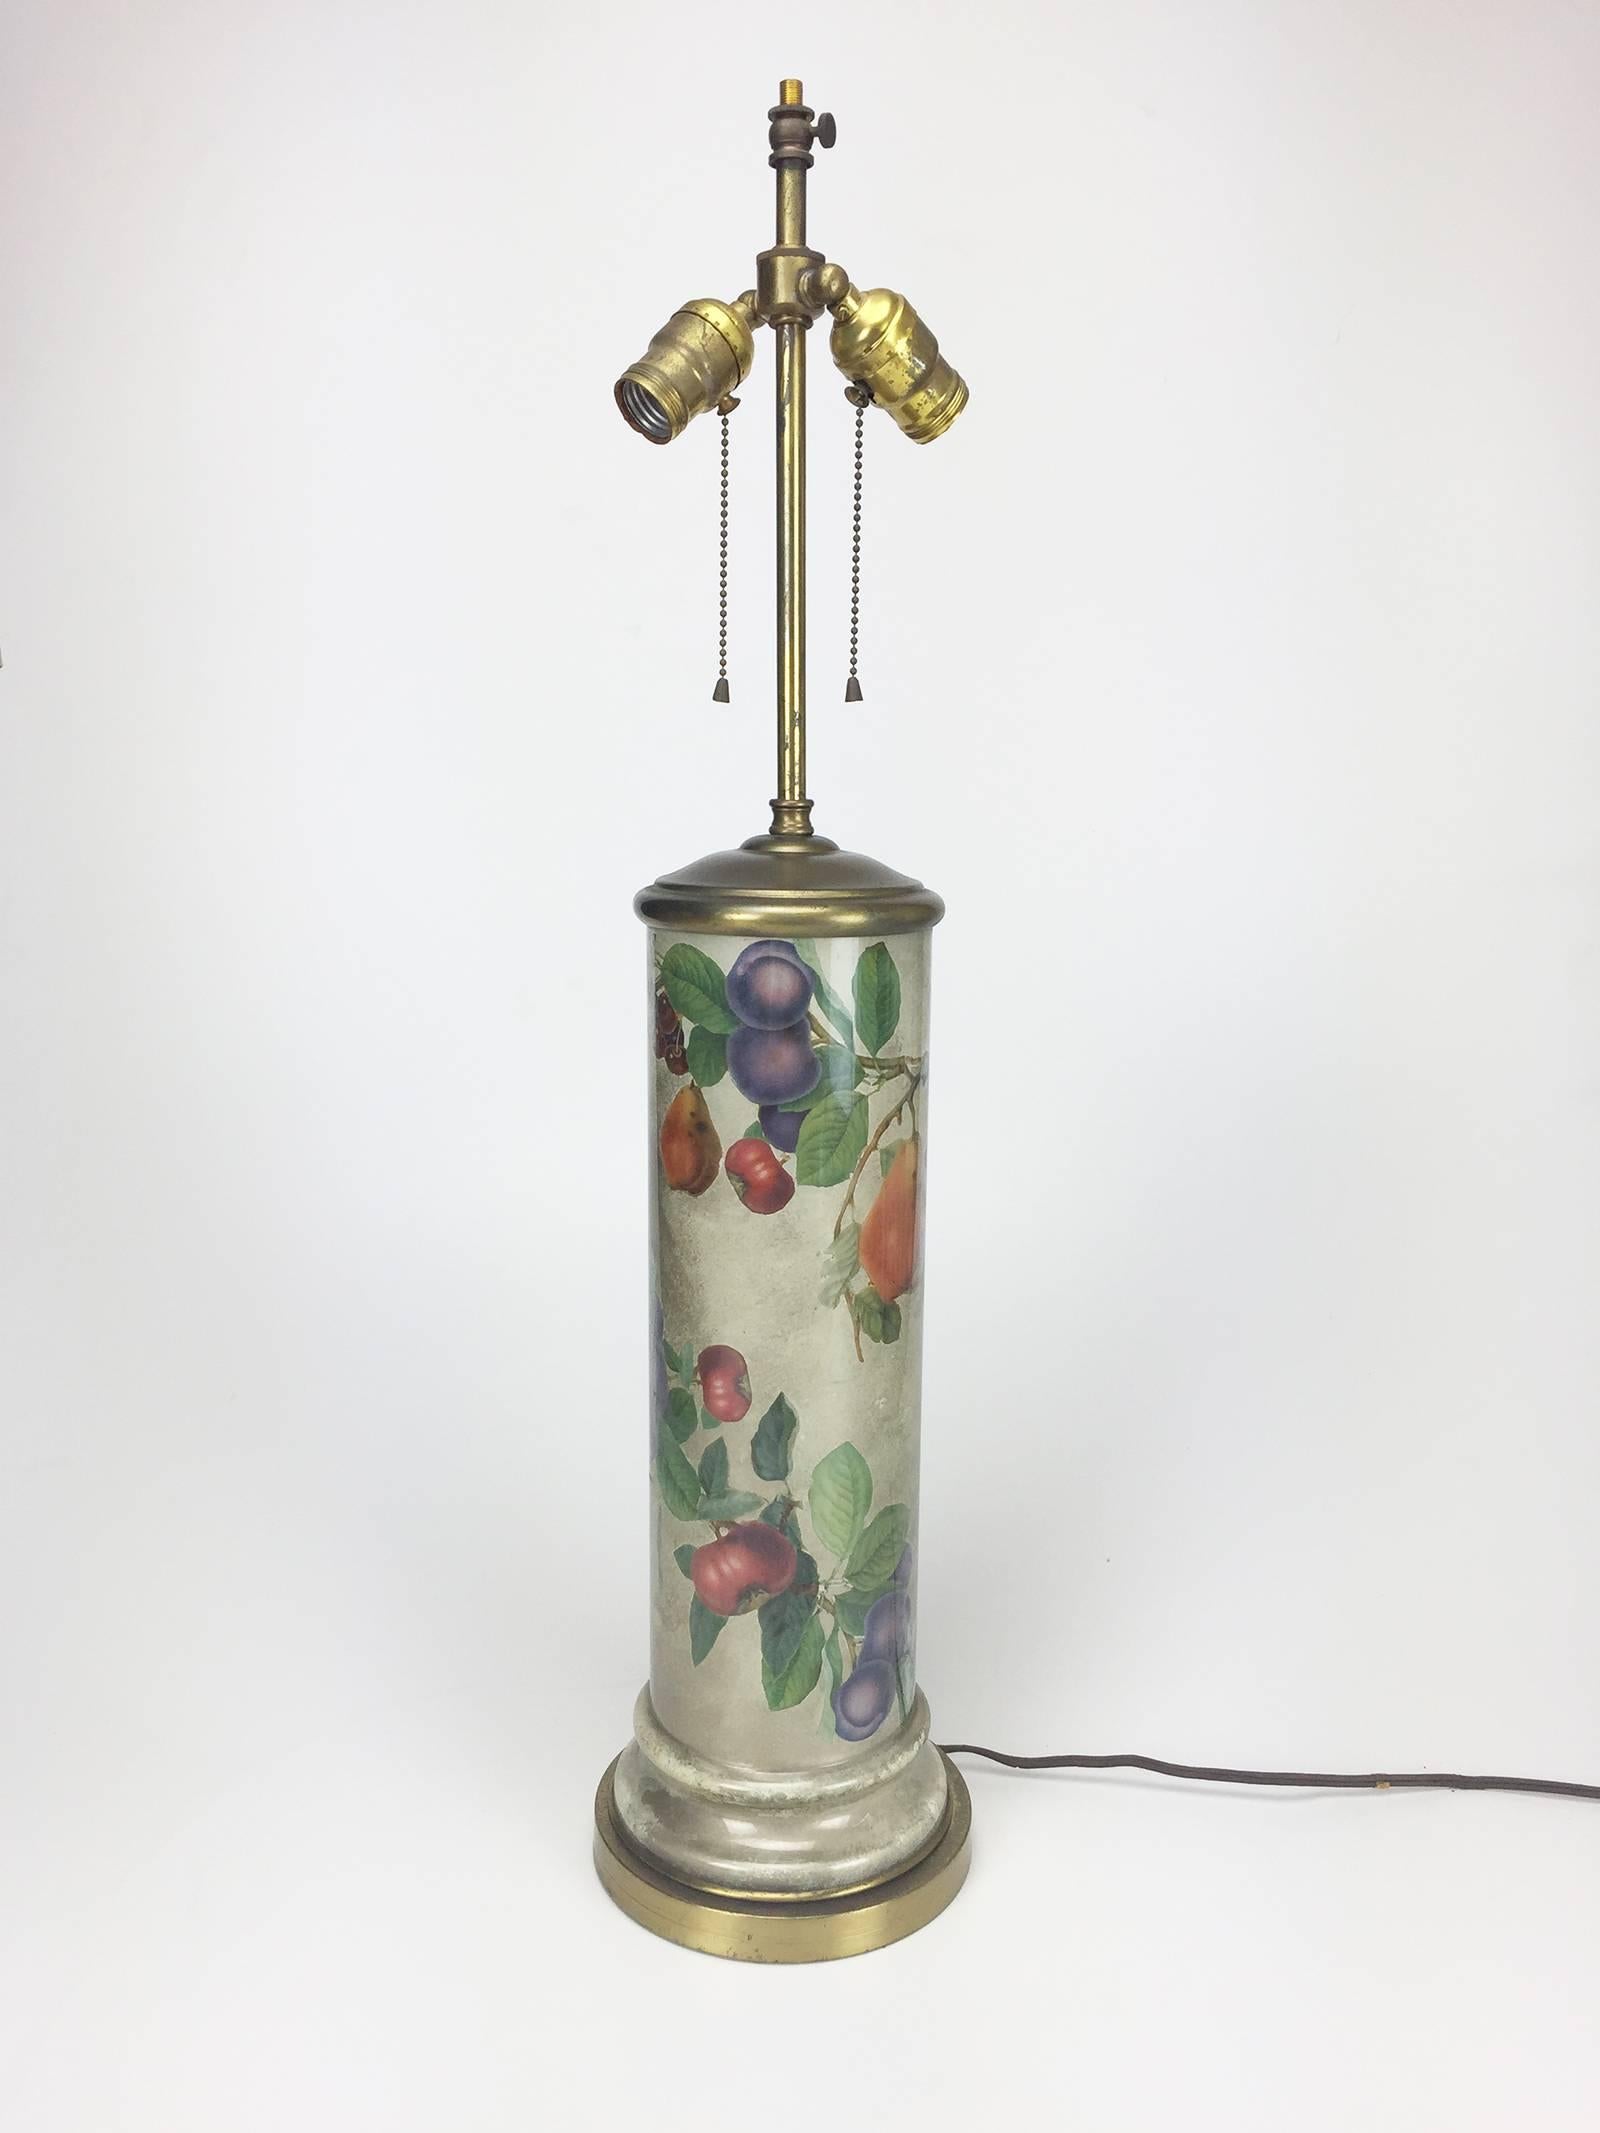 Tall table lamp with silvered body and decoupage floral and fruit design. Brass neck and base with double-headed fitting. Recently re-wired. Shade not included.